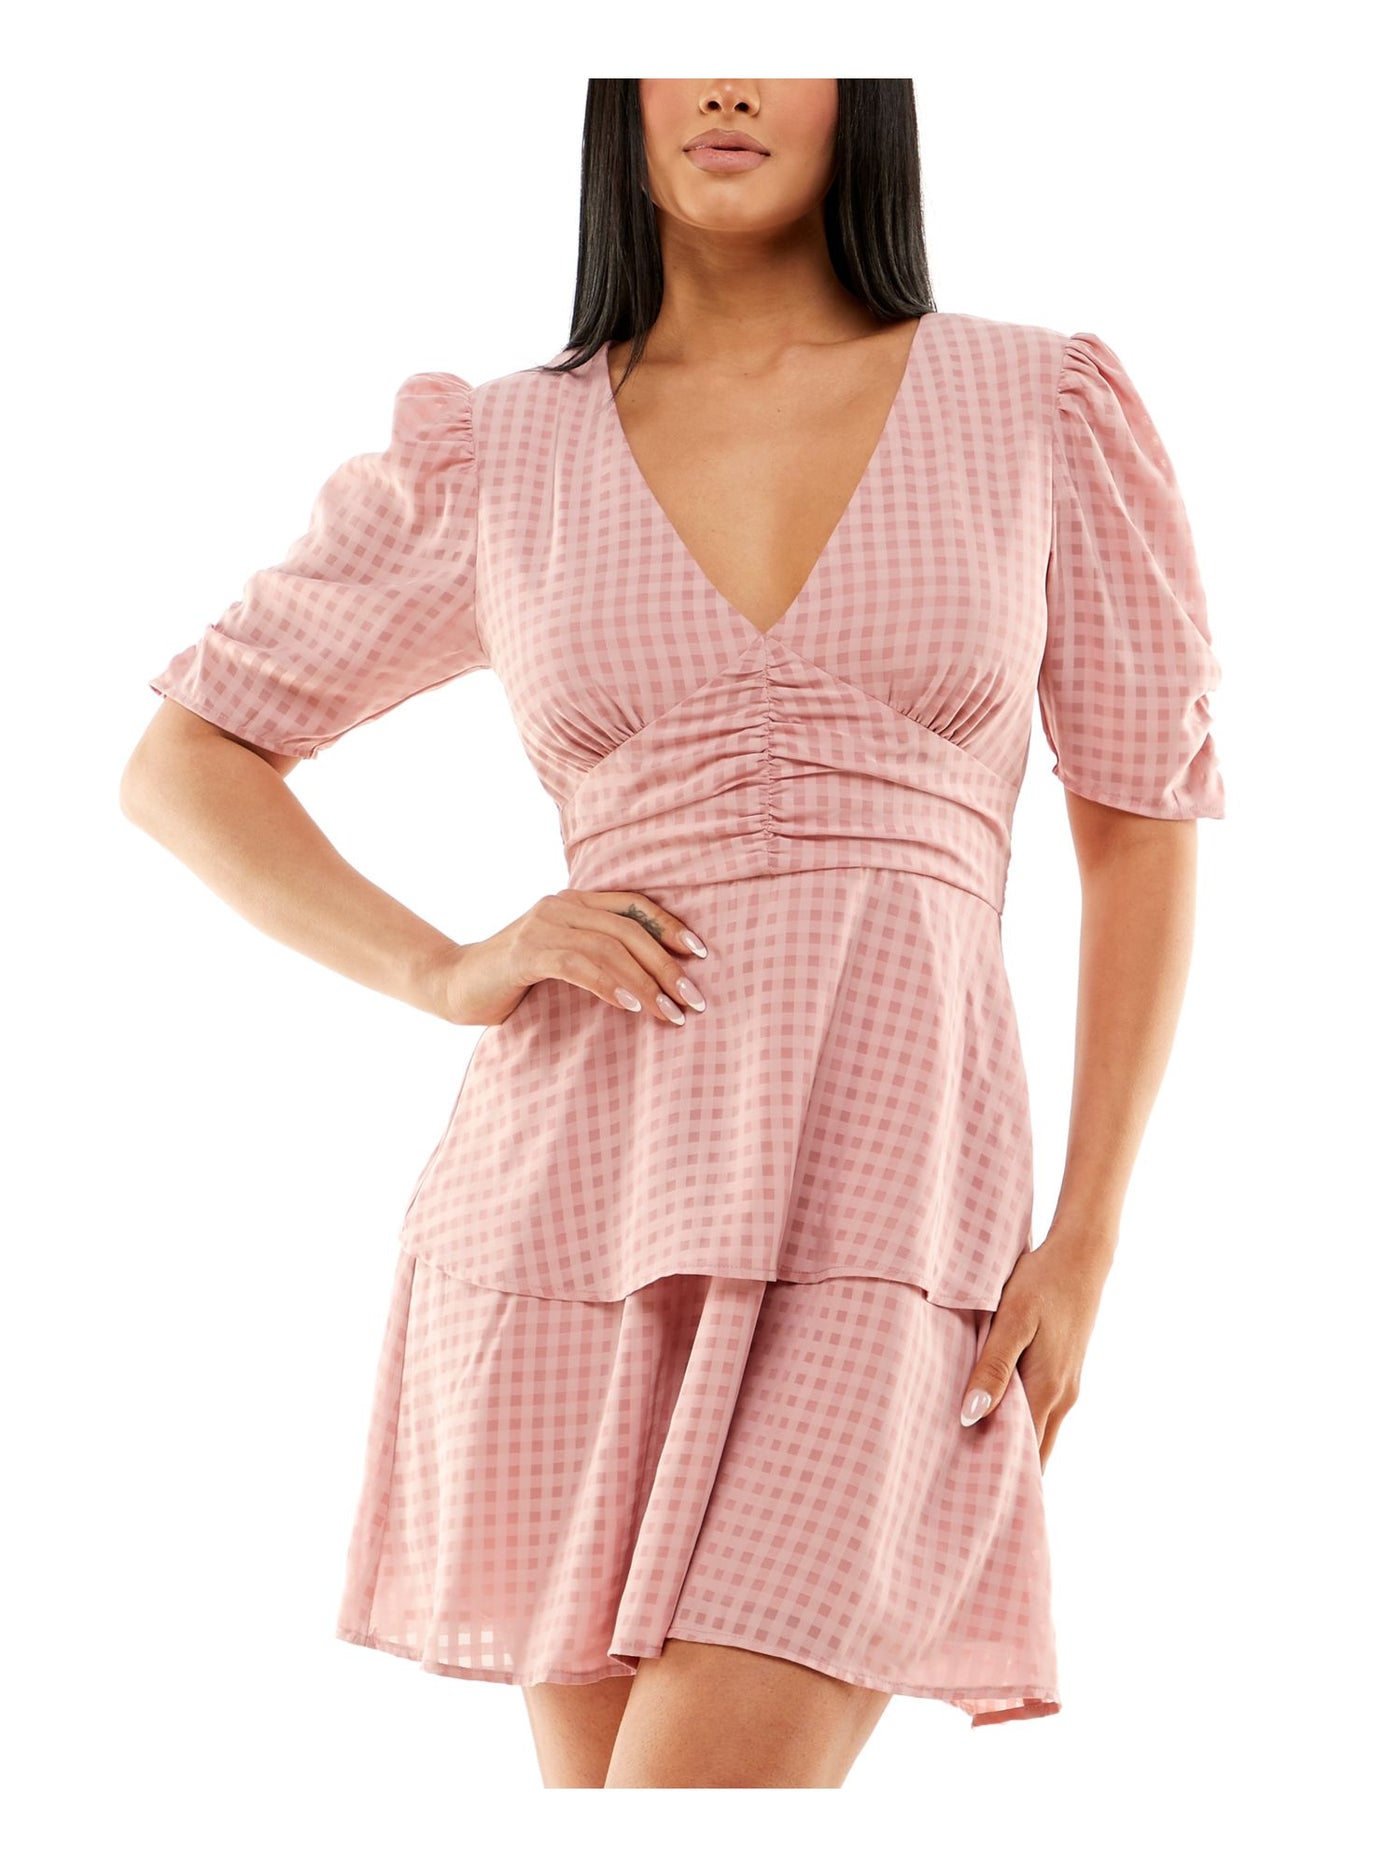 SPEECHLESS Womens Pink Ruched Zippered Back Tie Tiered Skirt Lined Gingham Short Sleeve V Neck Short Party Fit + Flare Dress Juniors S